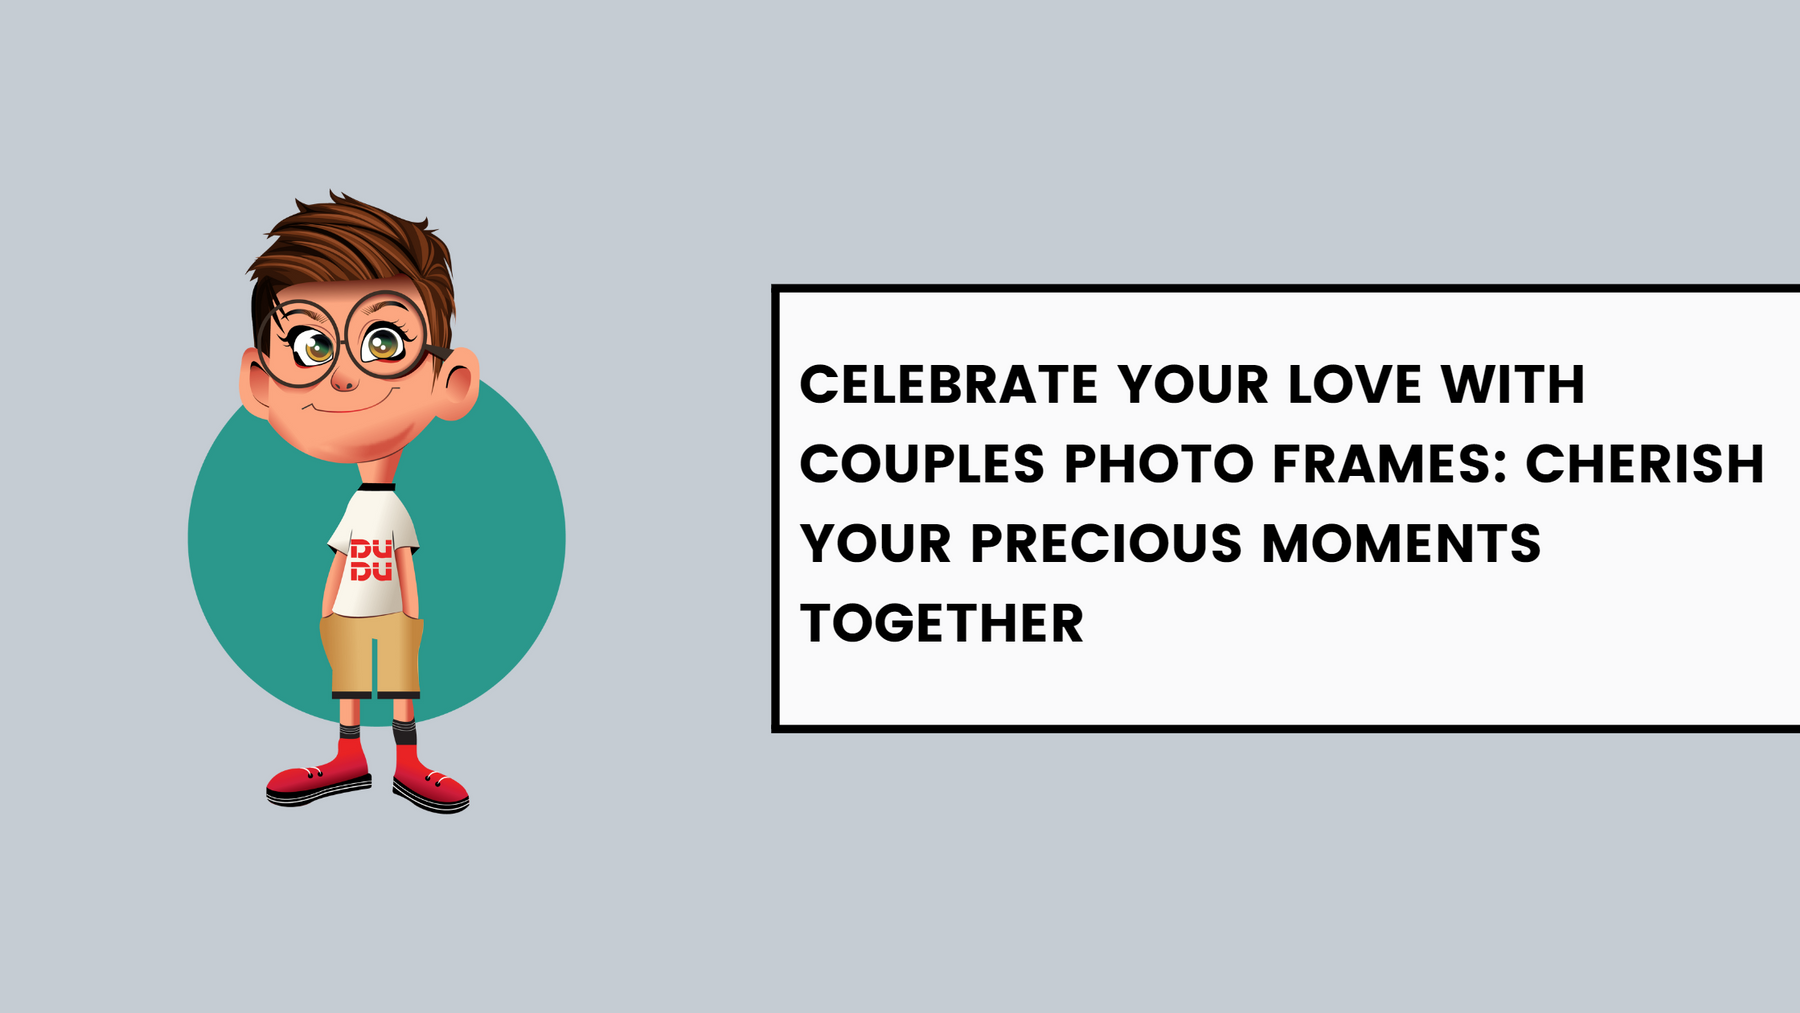 Celebrate Your Love with Couples Photo Frames: Cherish Your Precious Moments Together